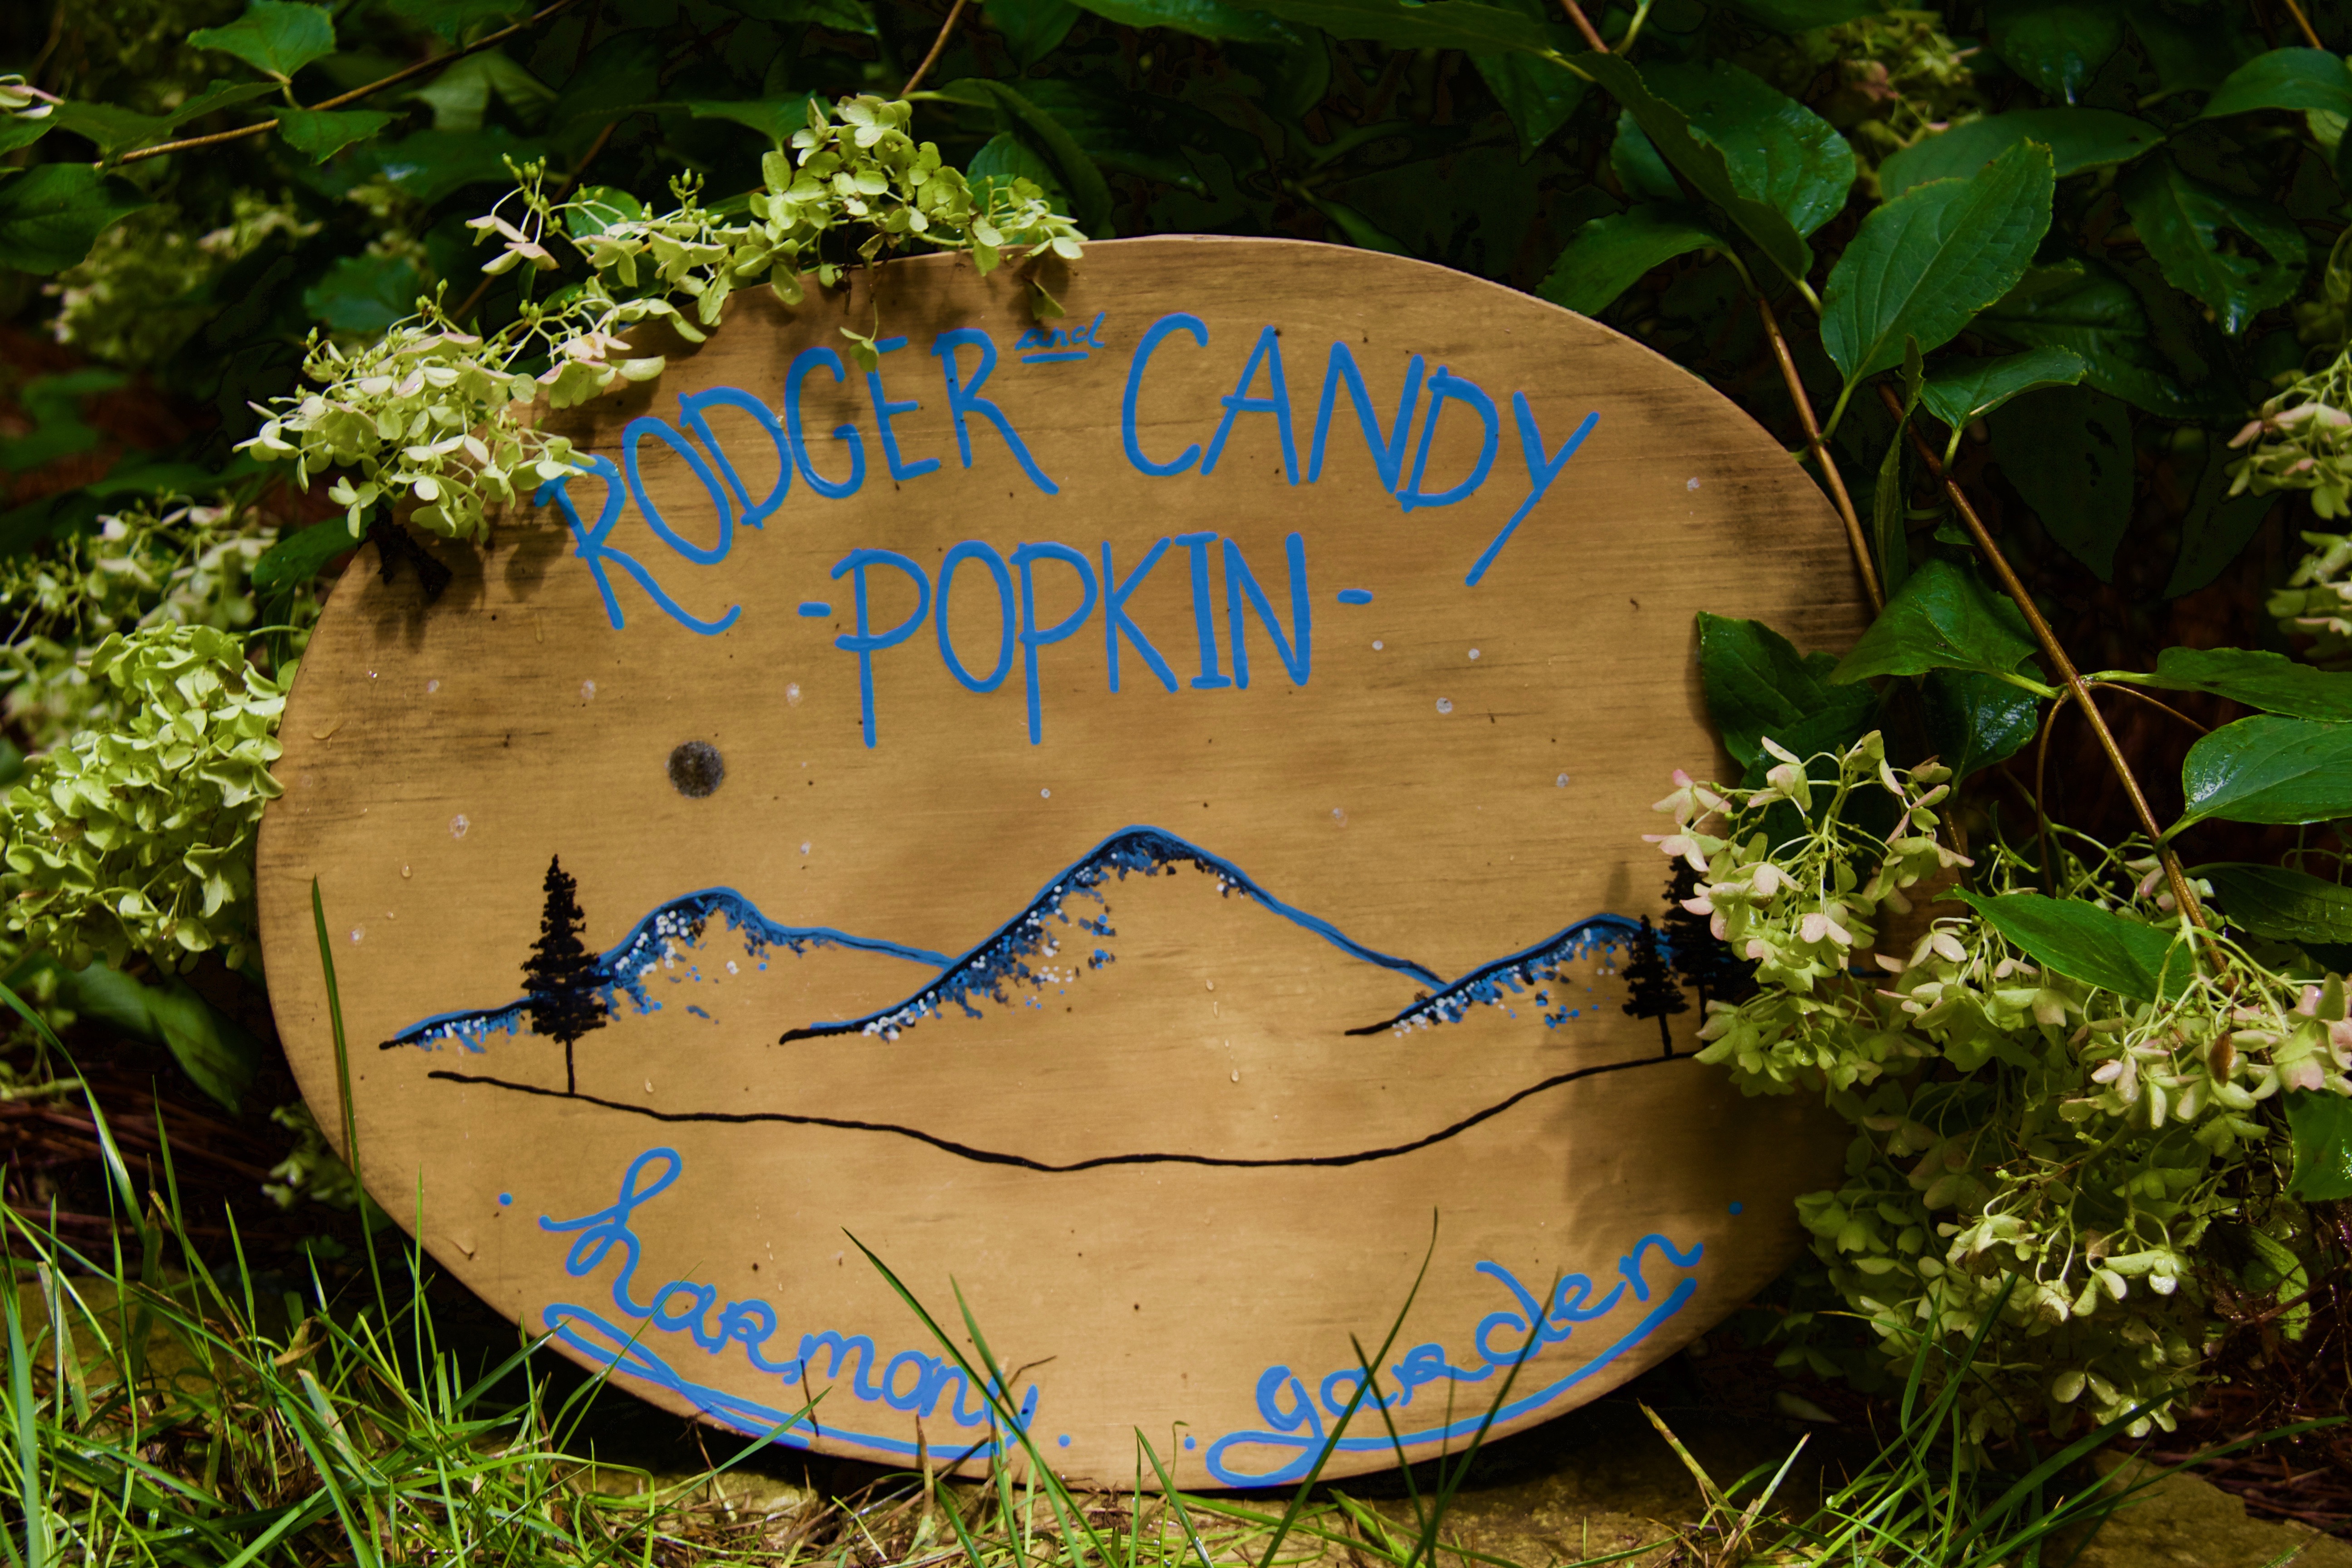 The Rodger and Candy Popkin Harmony Garden